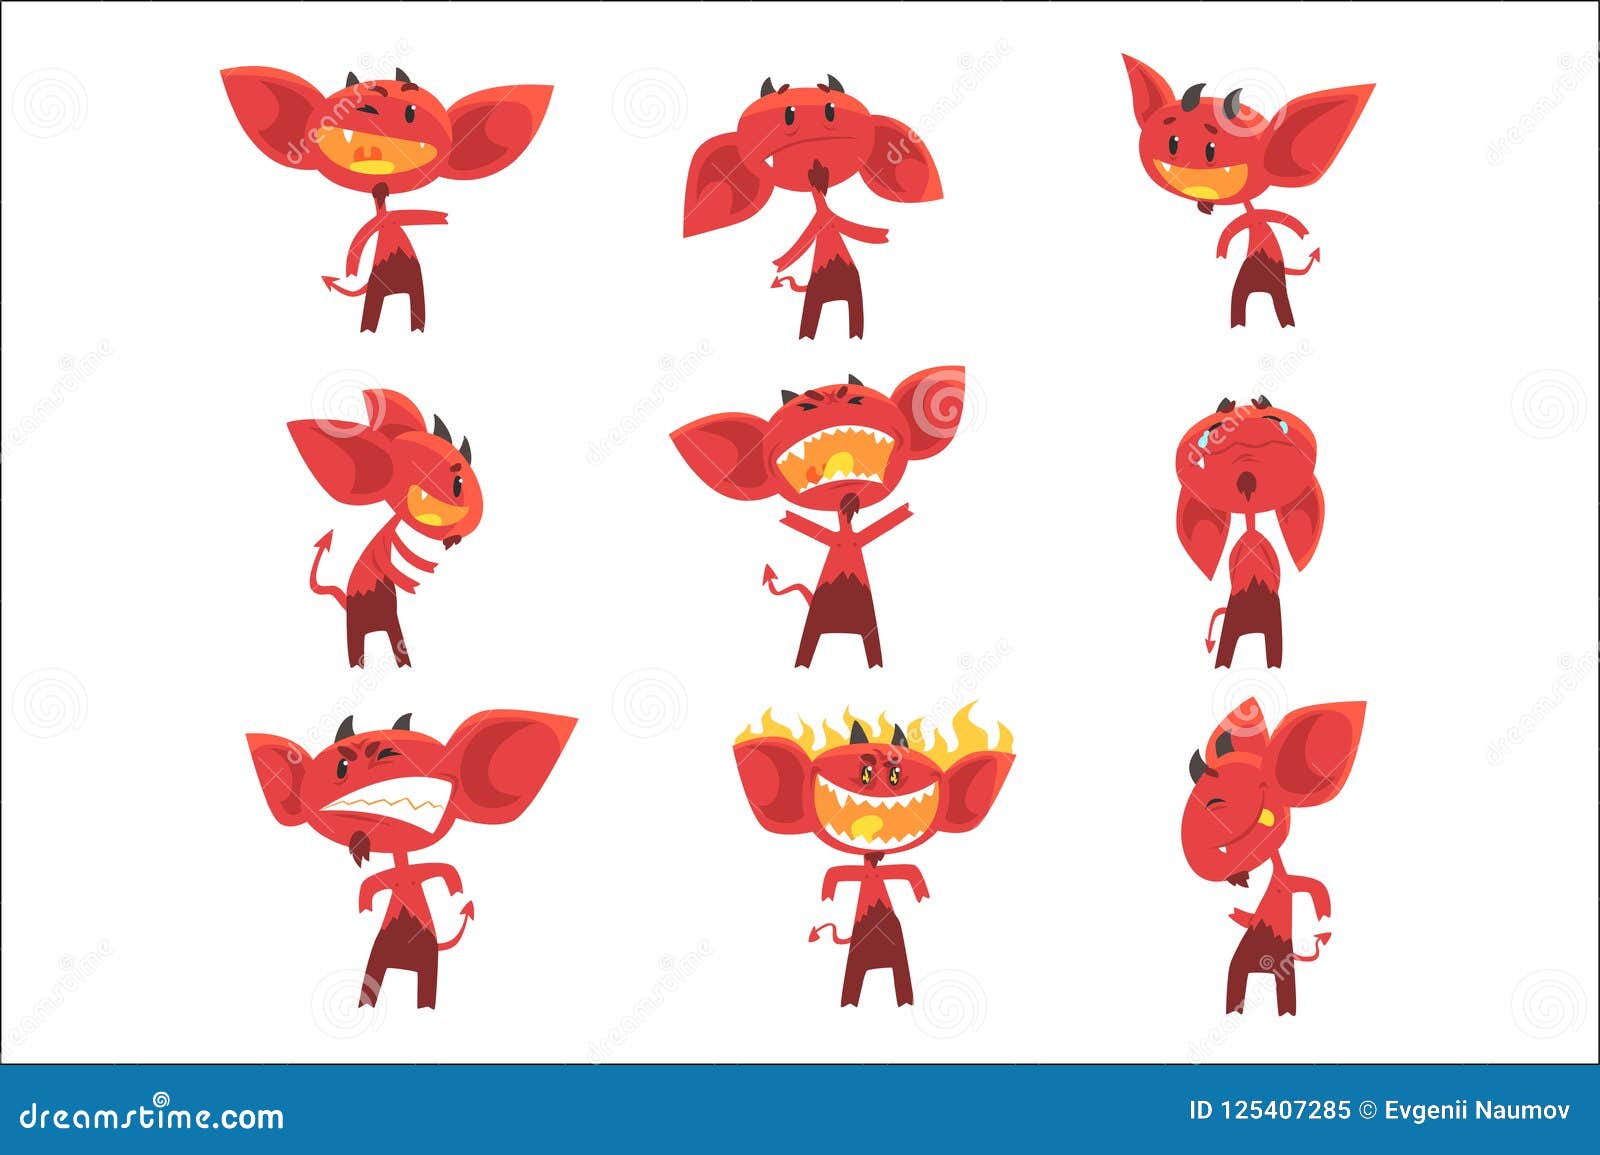 Funny Red Devil Cartoon Characters with Different Emotions Set of Vector  Illustrations Stock Vector - Illustration of angry, fire: 125407285